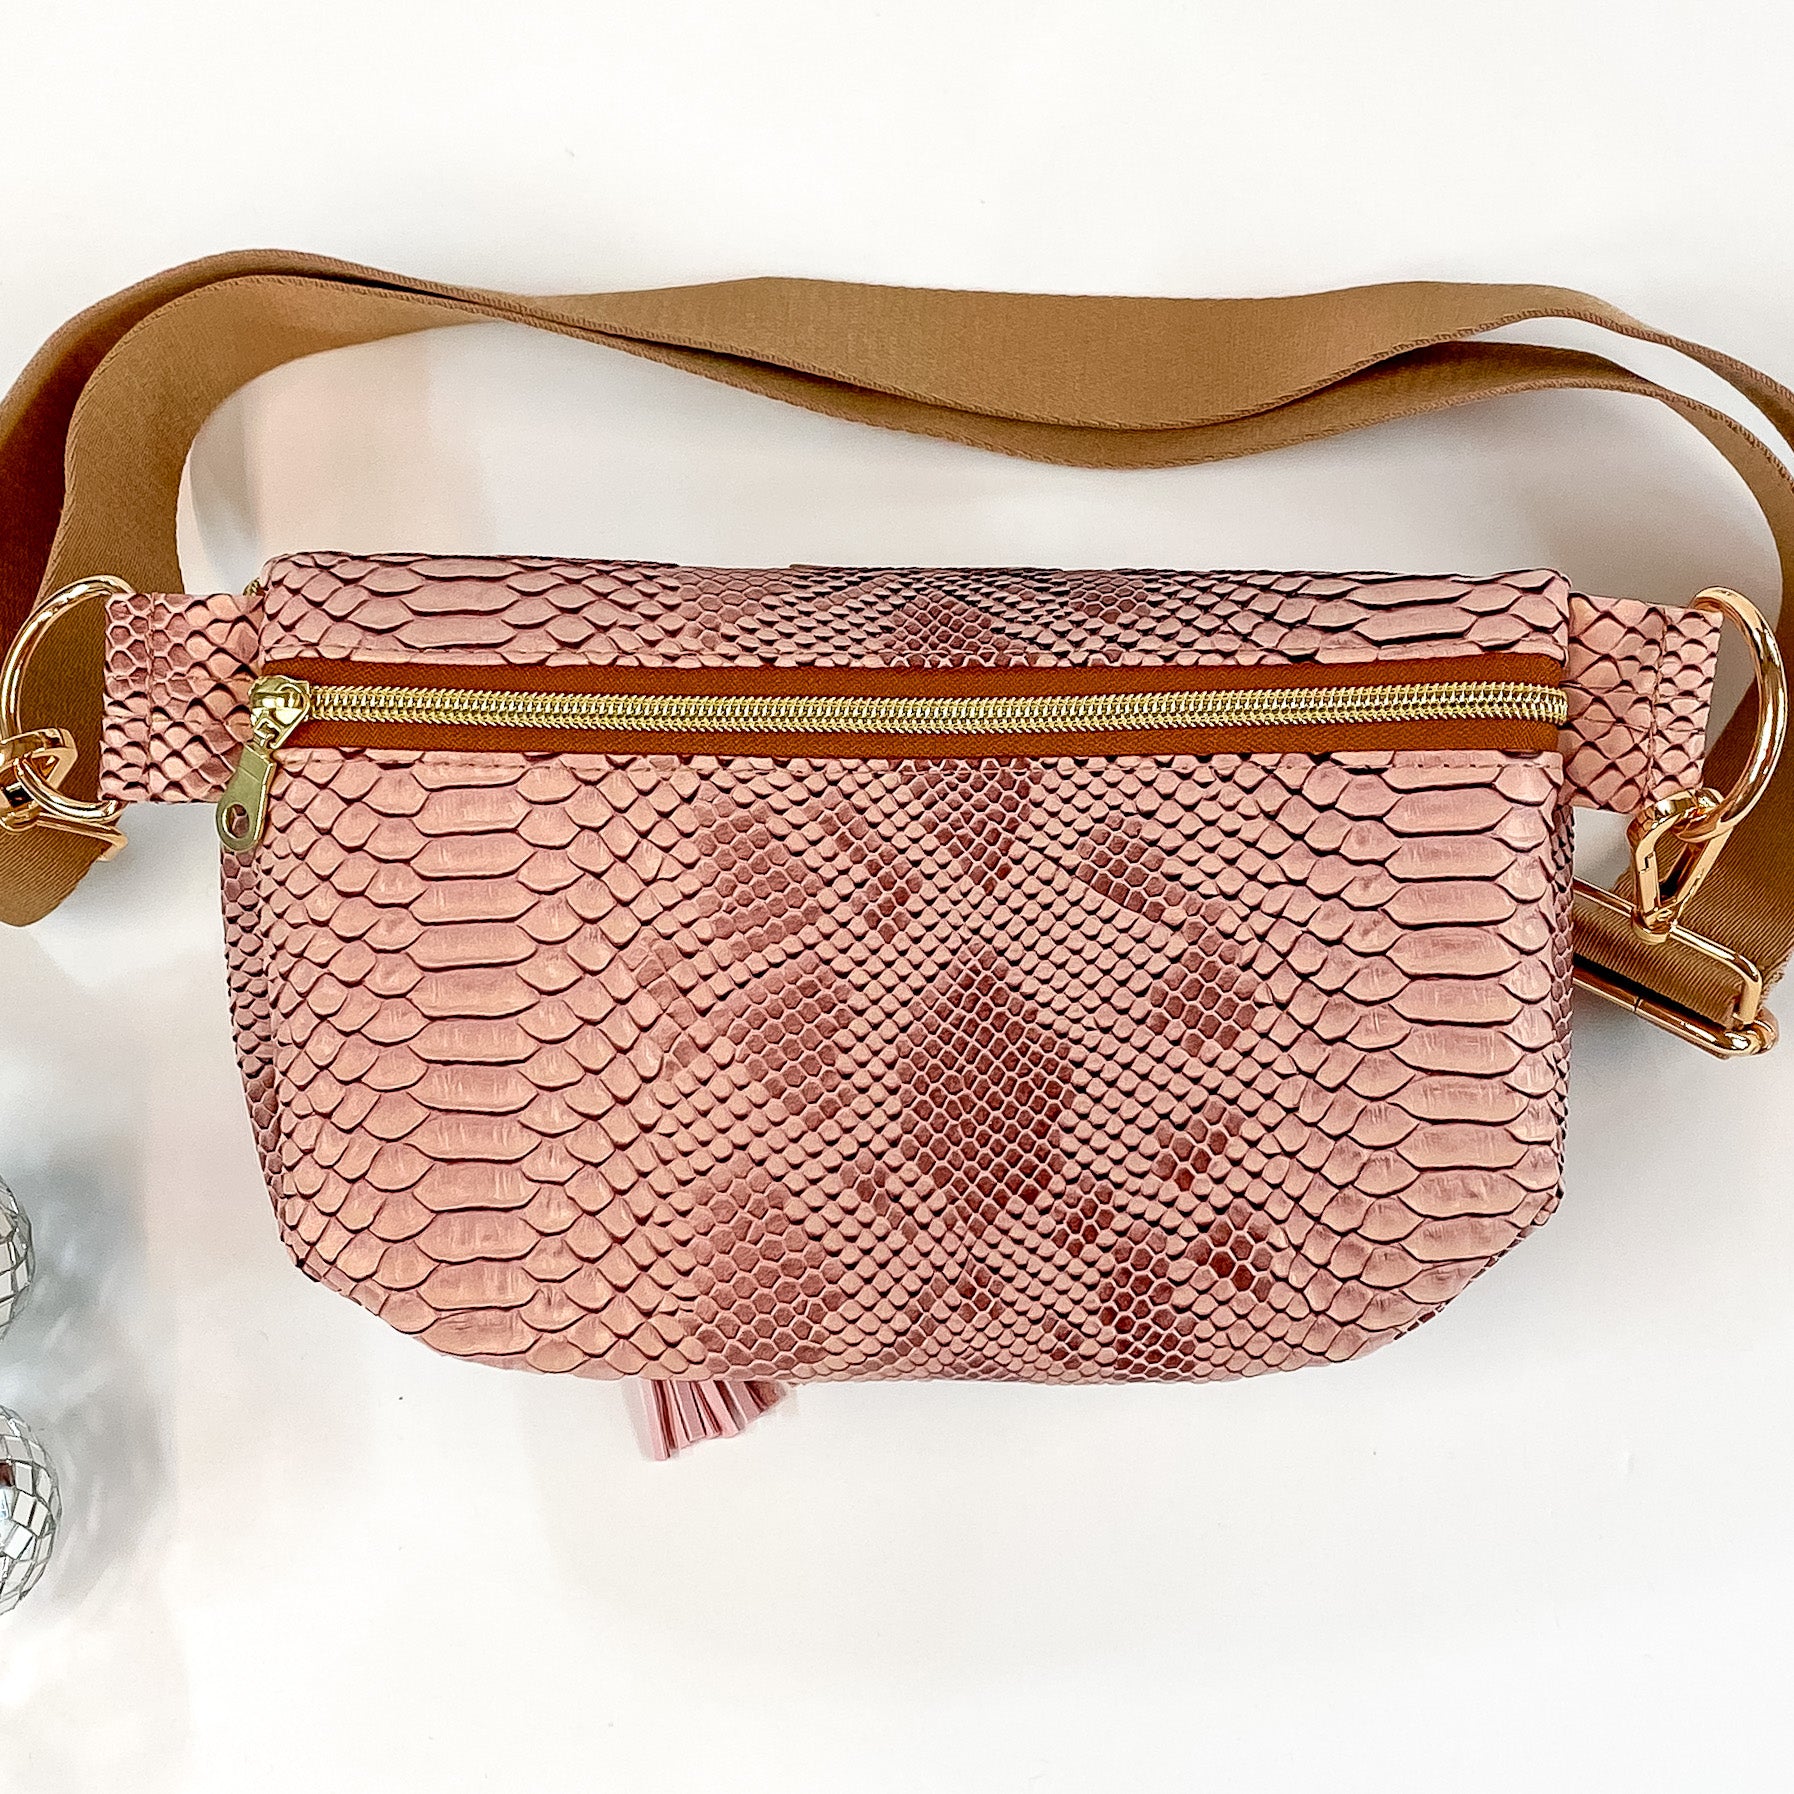 Makeup Junkie | Copperazzi Sidekick with Back Zipper in Dusty Pink Snake Print - Giddy Up Glamour Boutique